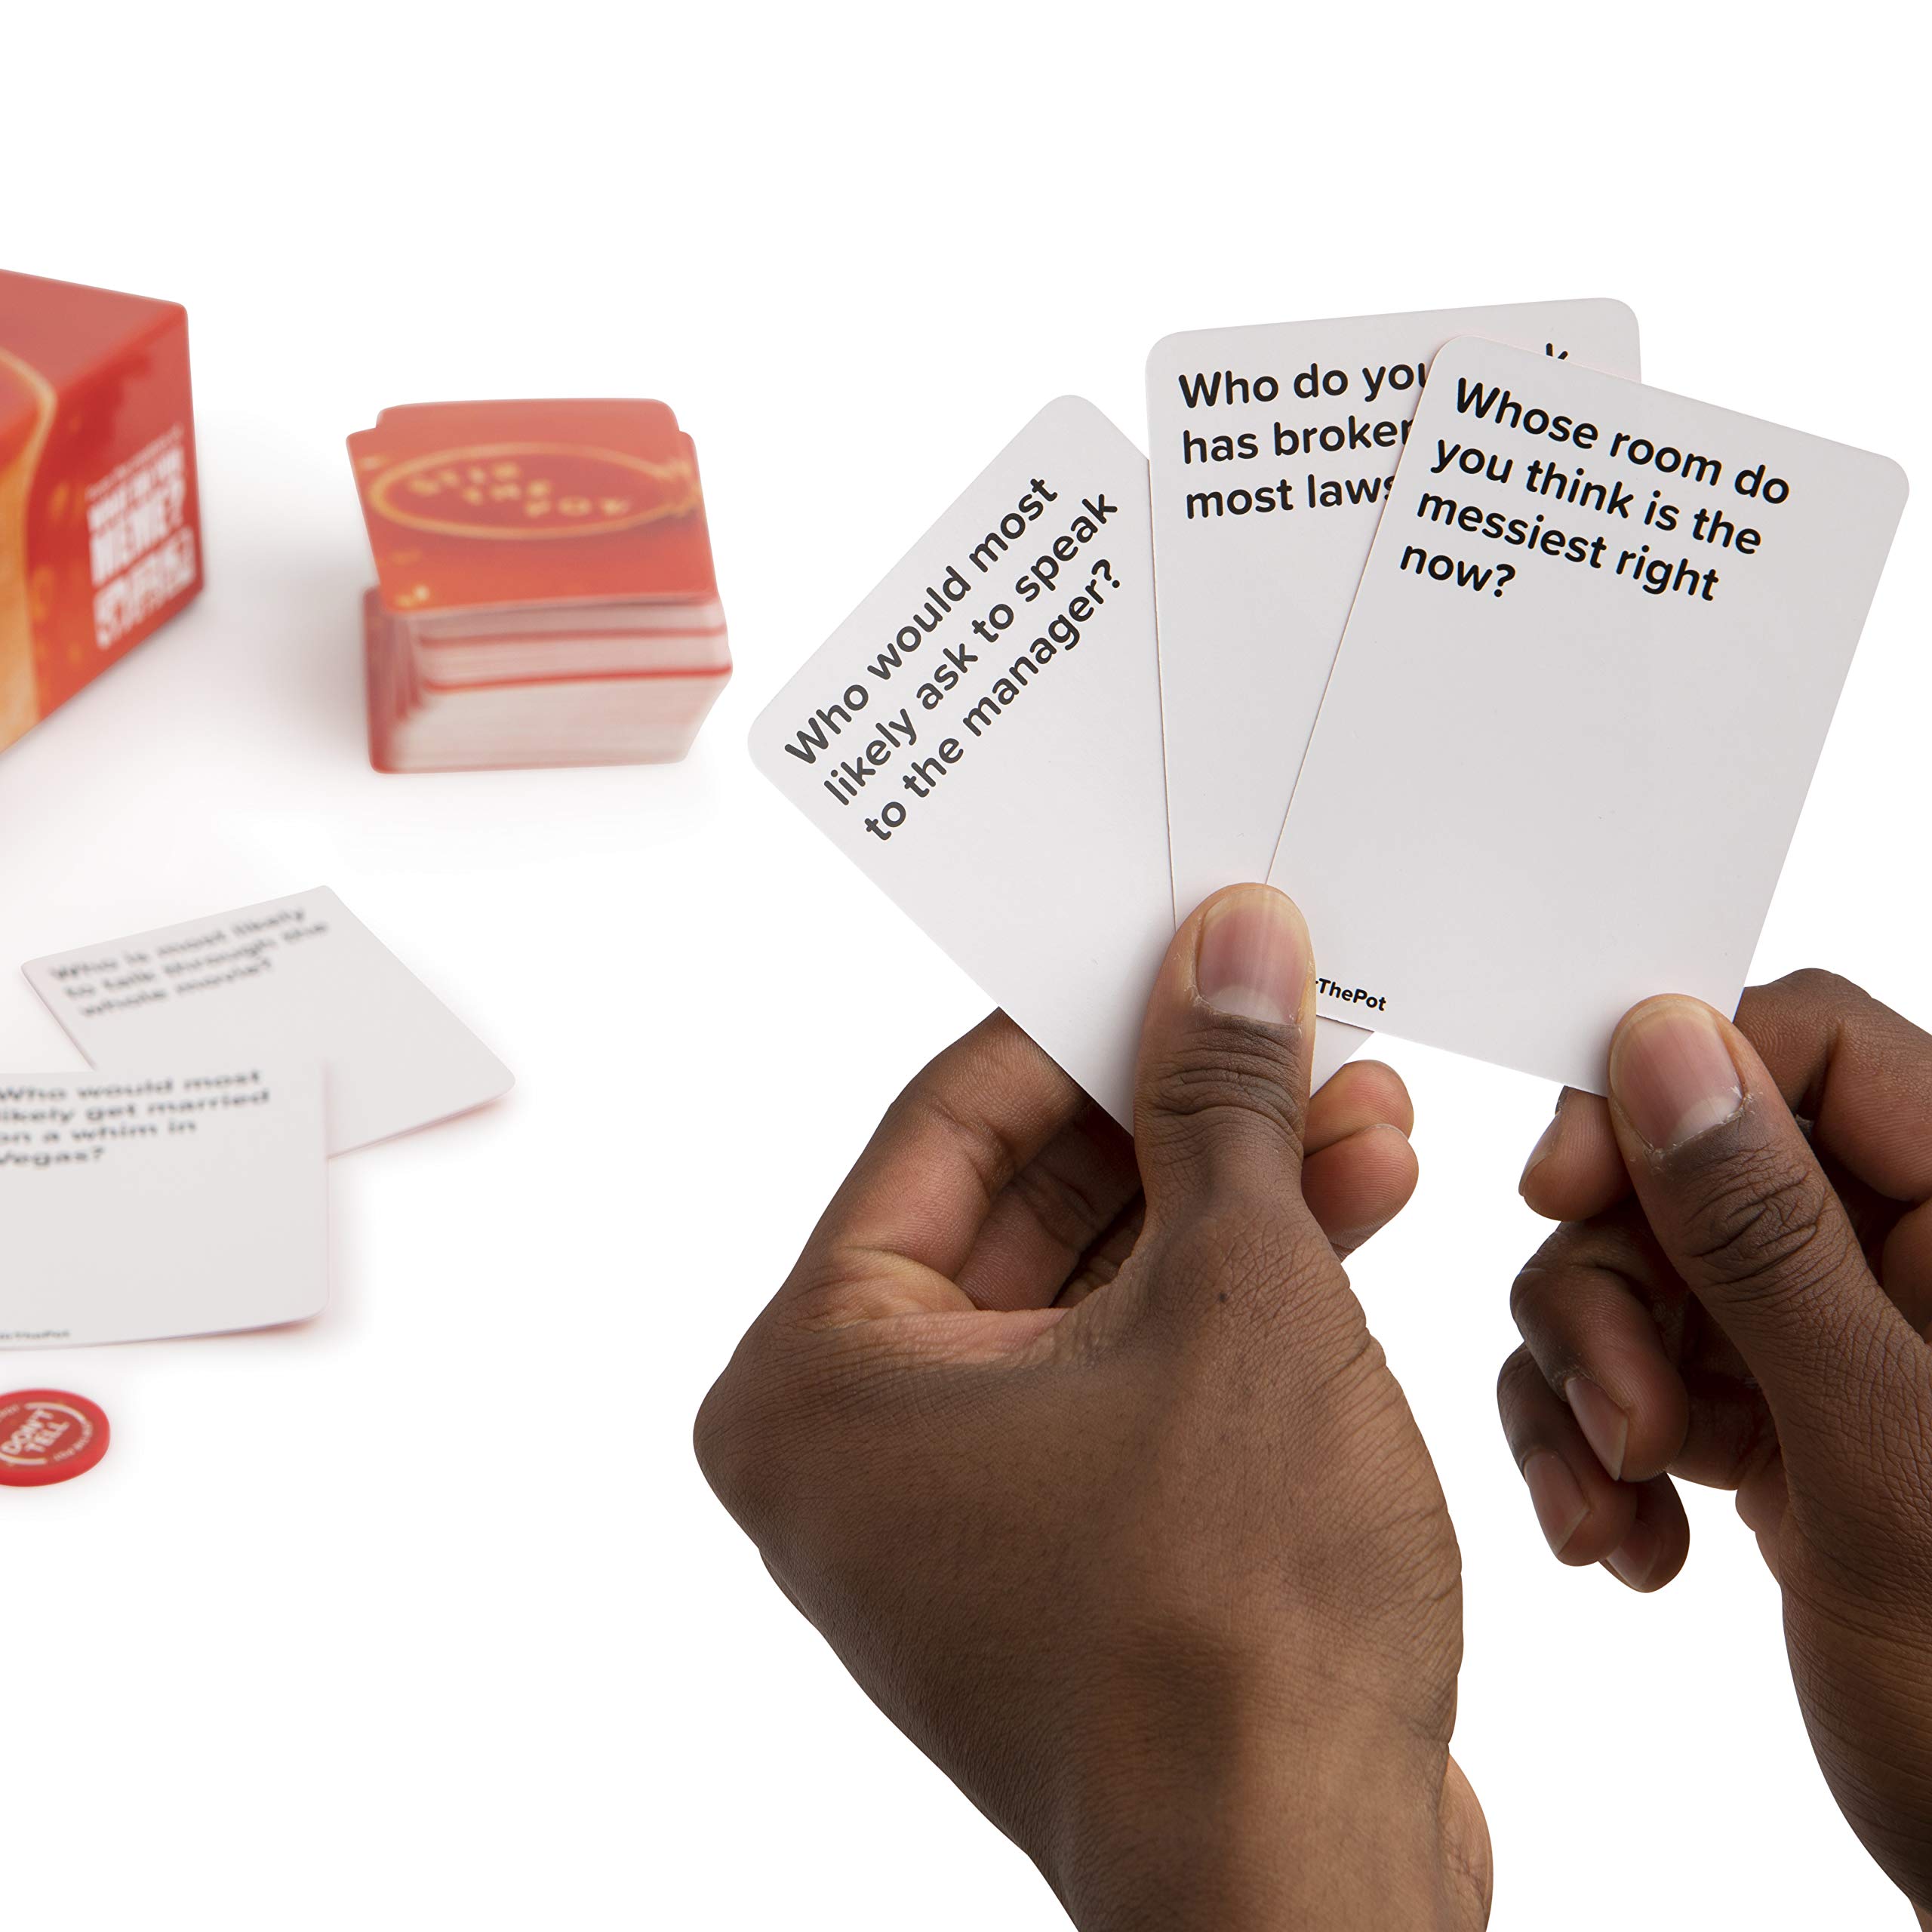 WHAT DO YOU MEME? Stir The Pot - The Party Game That Roasts Your Friends - Adult Card Games for Game Night